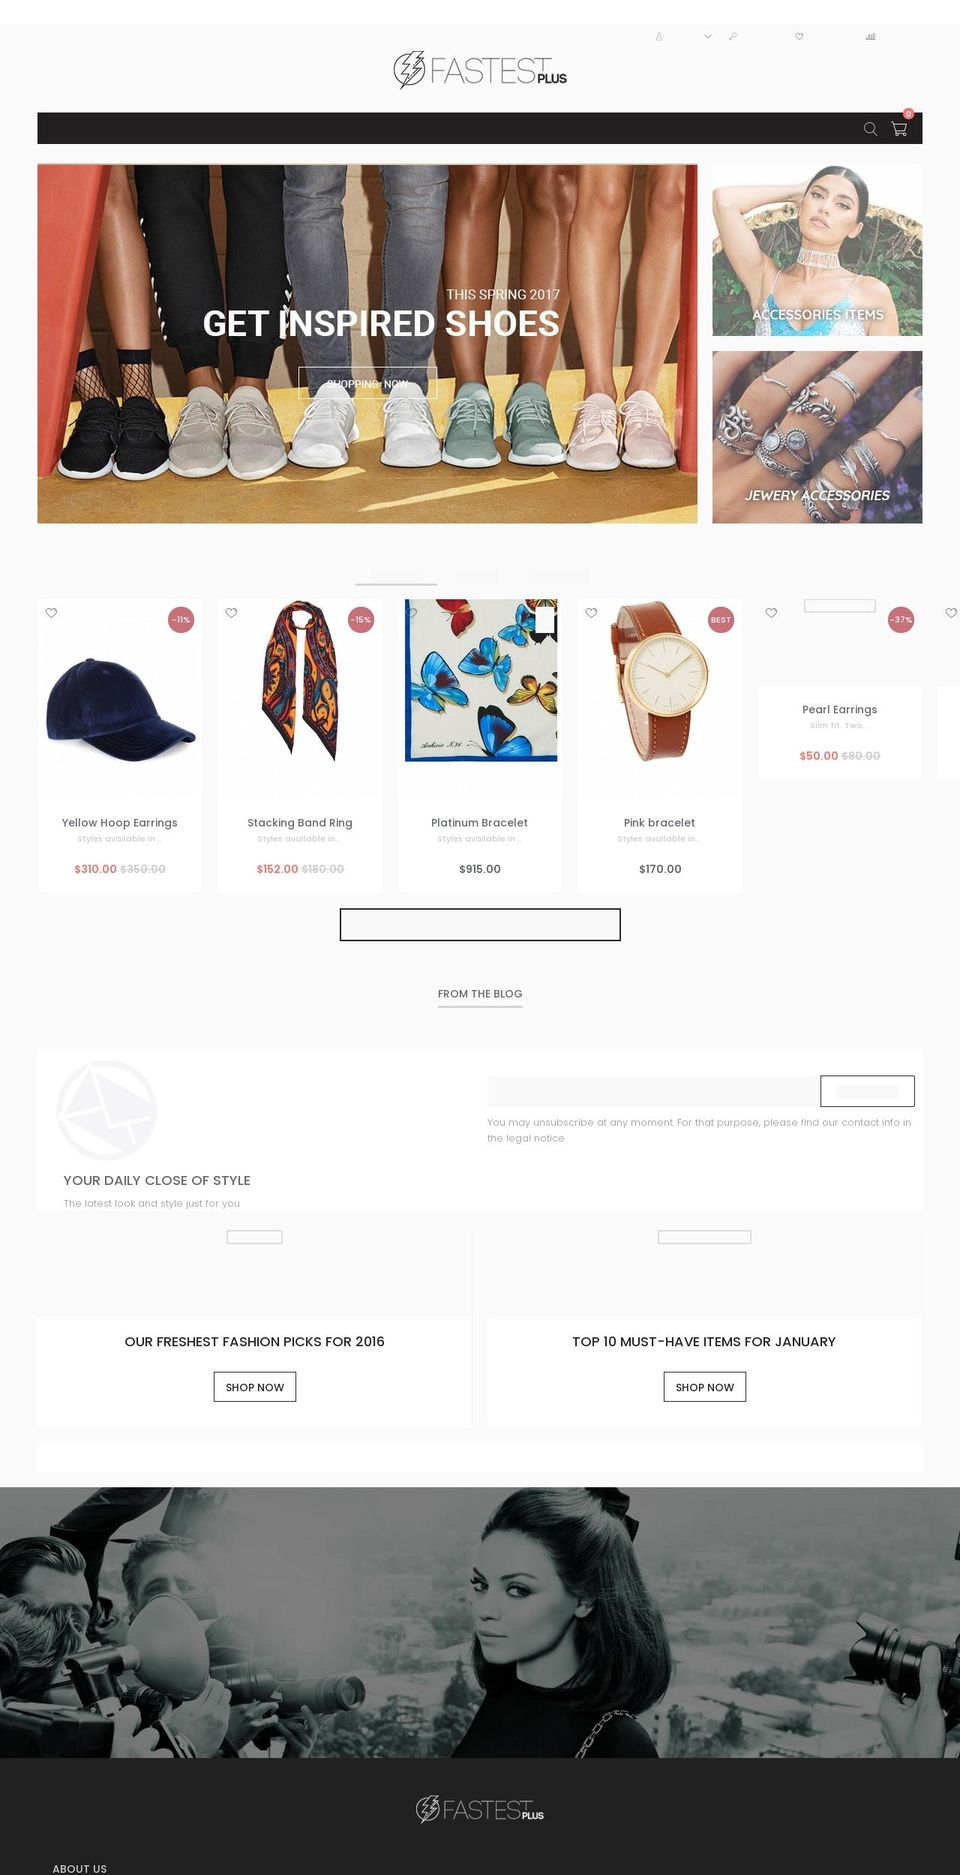 FASTEST Shopify theme site example fastest-accessories.myshopify.com